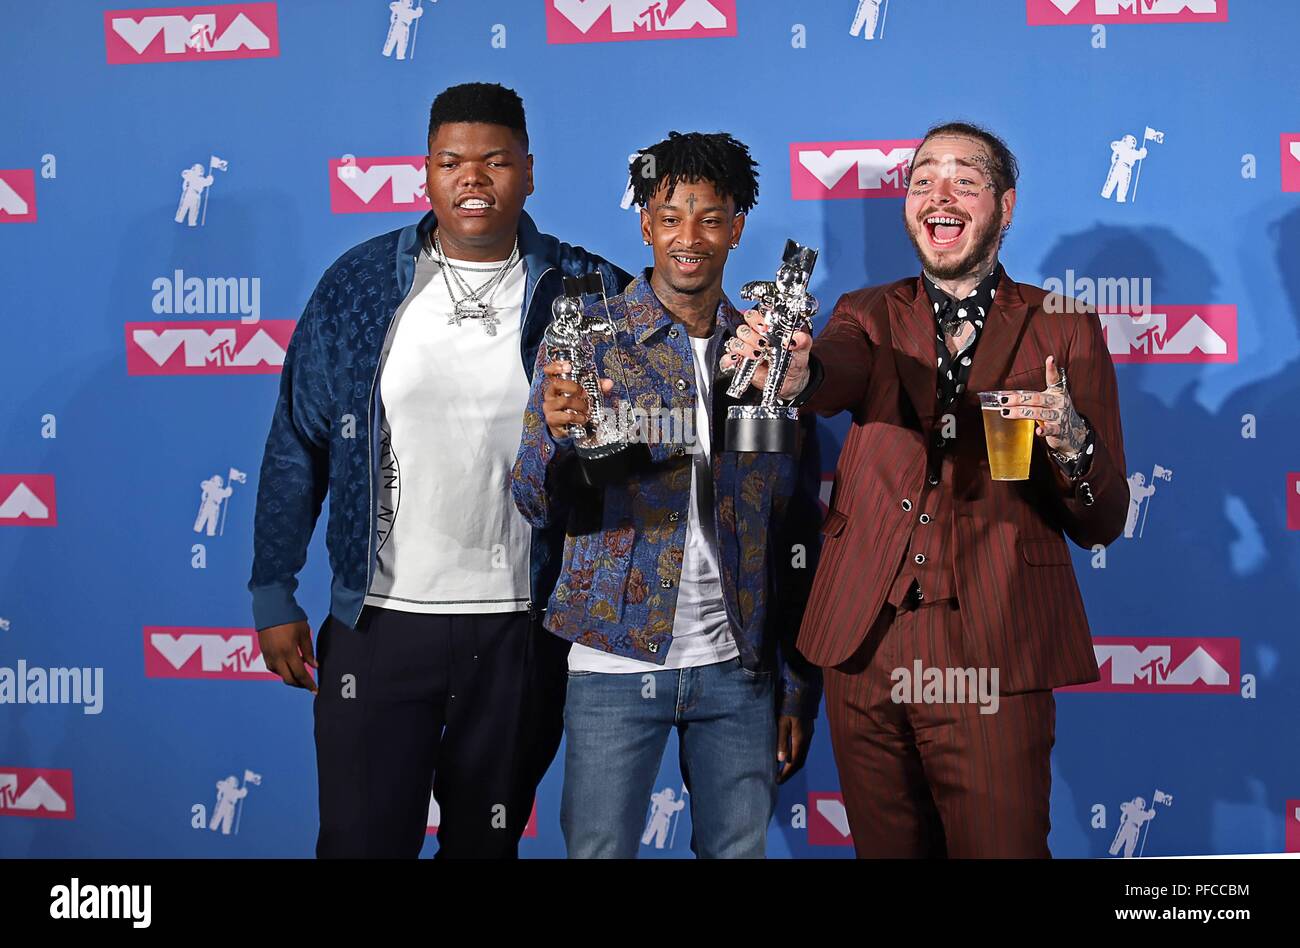 Inglewood, United States Of America. 20th Aug, 2018. 21 Savage (c) and Post  Malone (r) pose with the Song of the Year award in the press room of the  2018 MTV Video